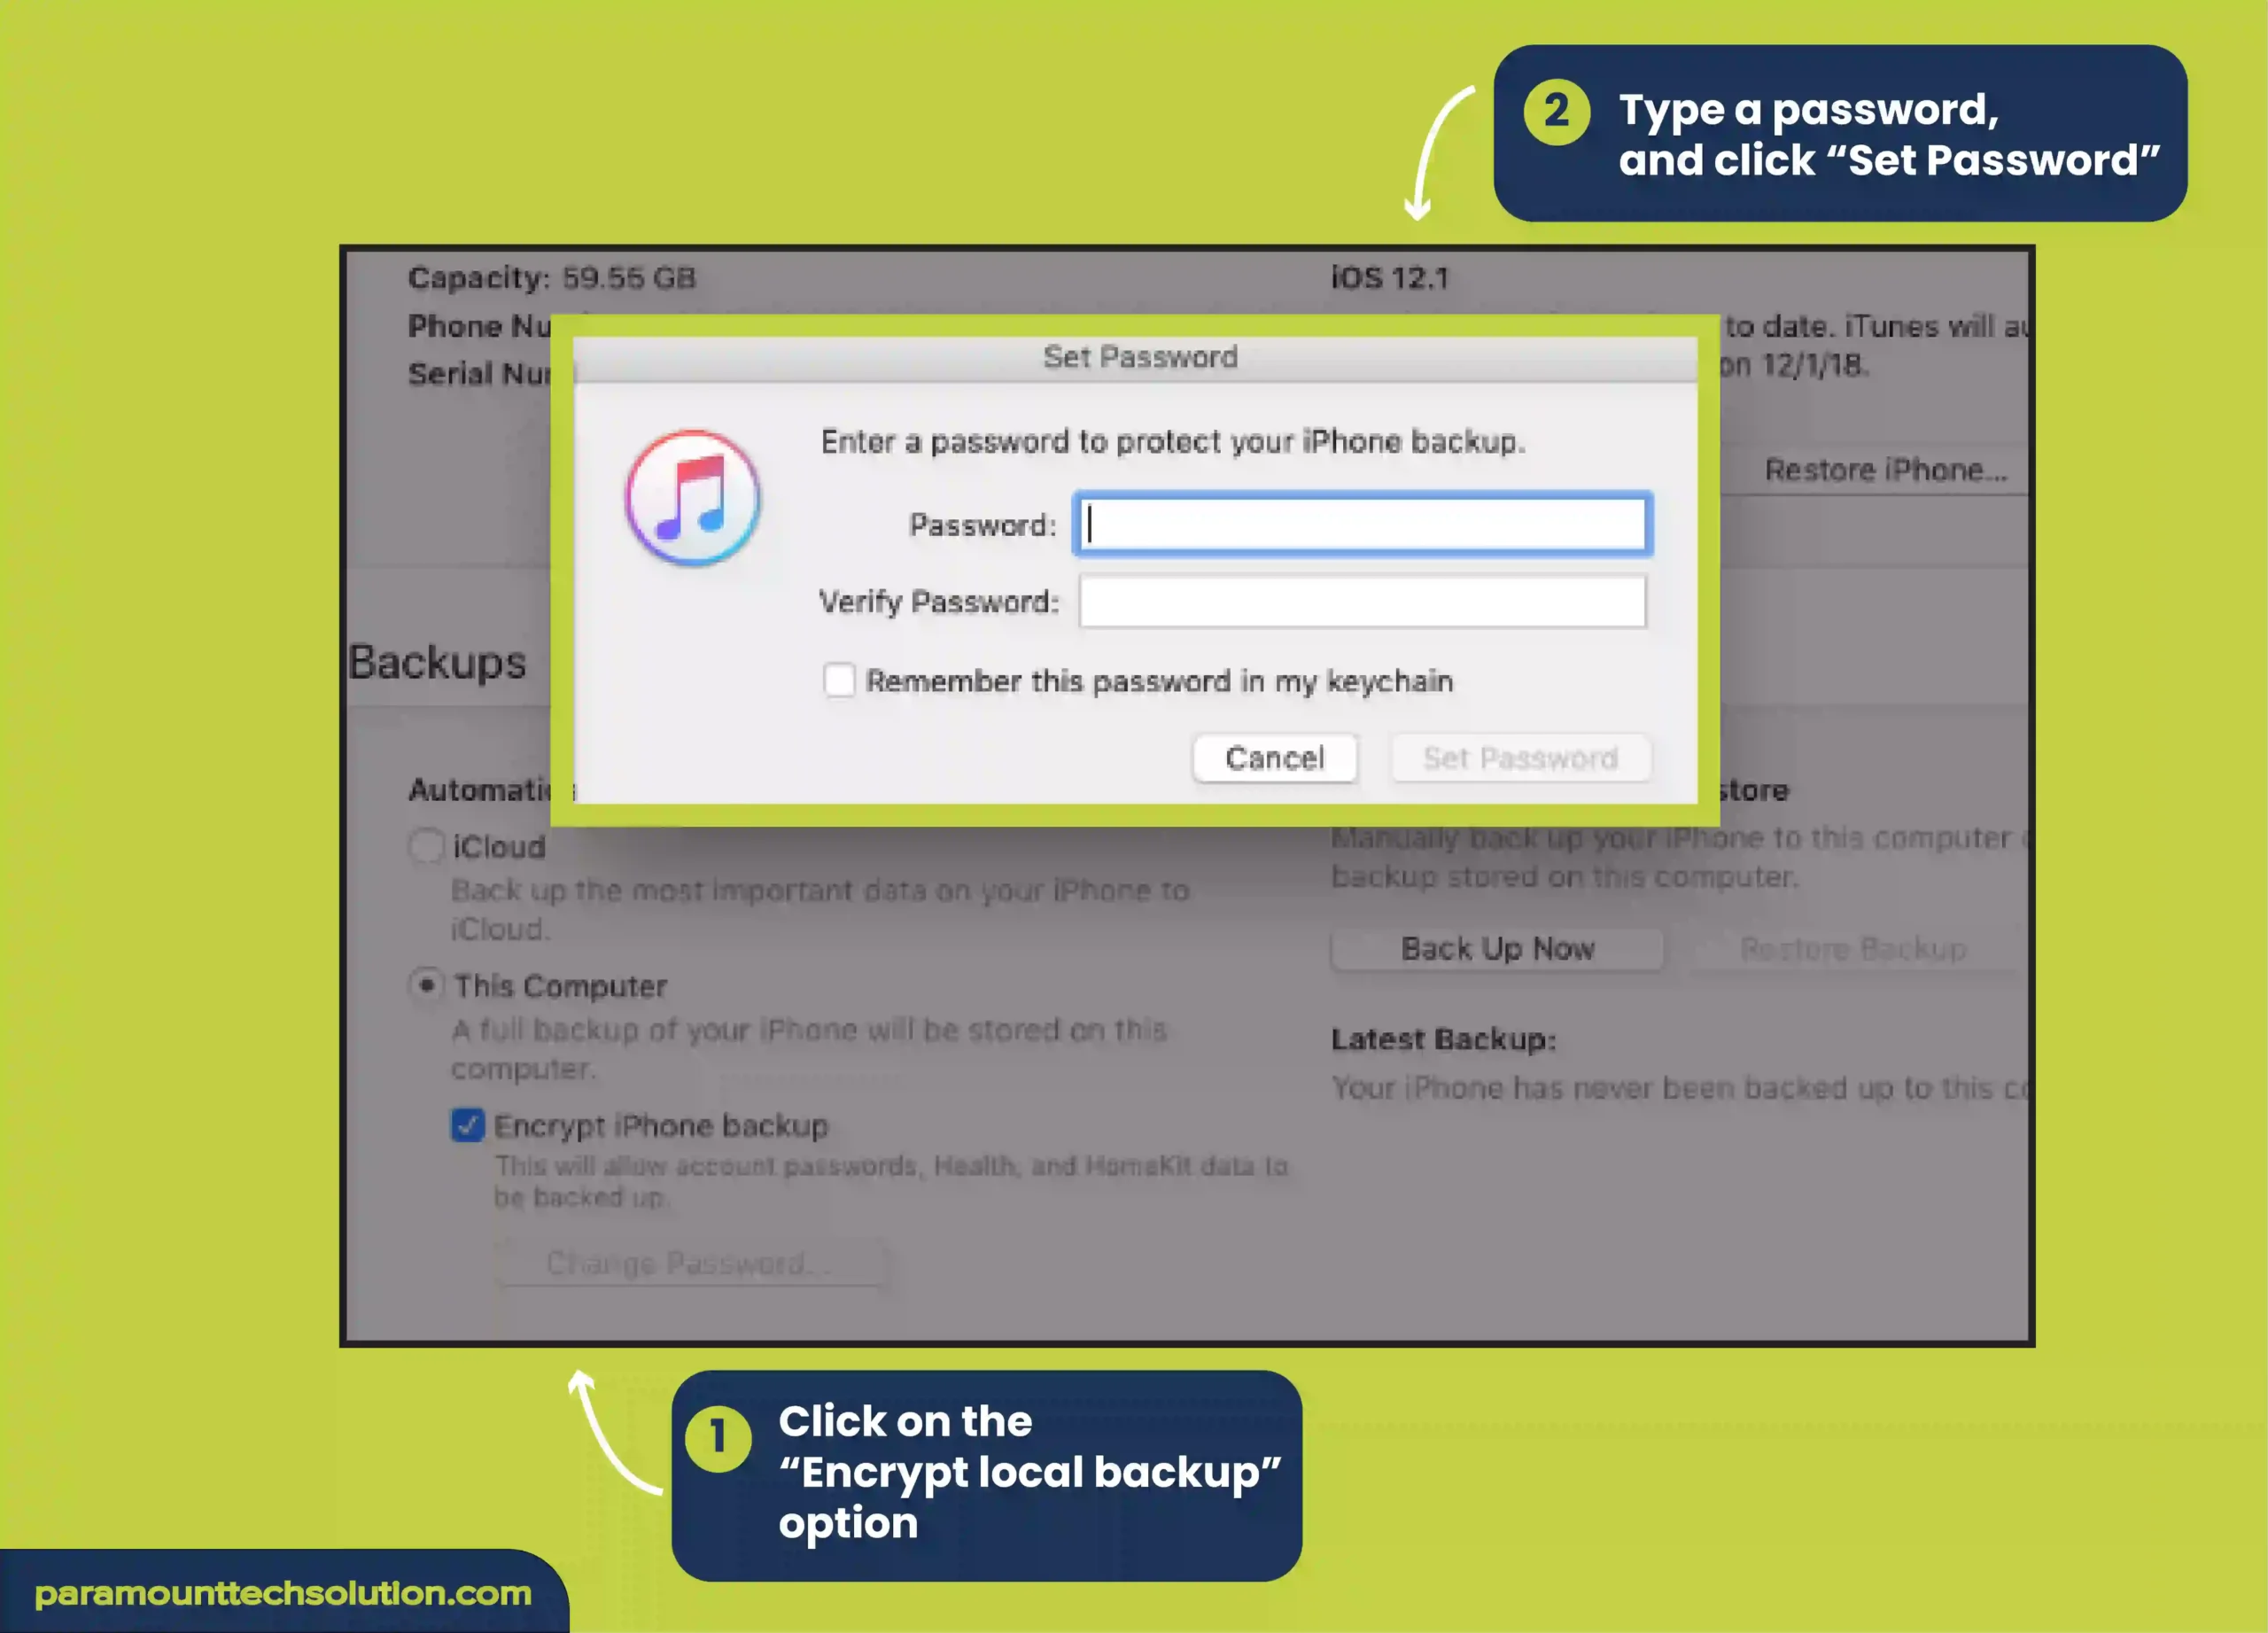 Back up to iTunes with encrypted password using iTunes encrypted backup password